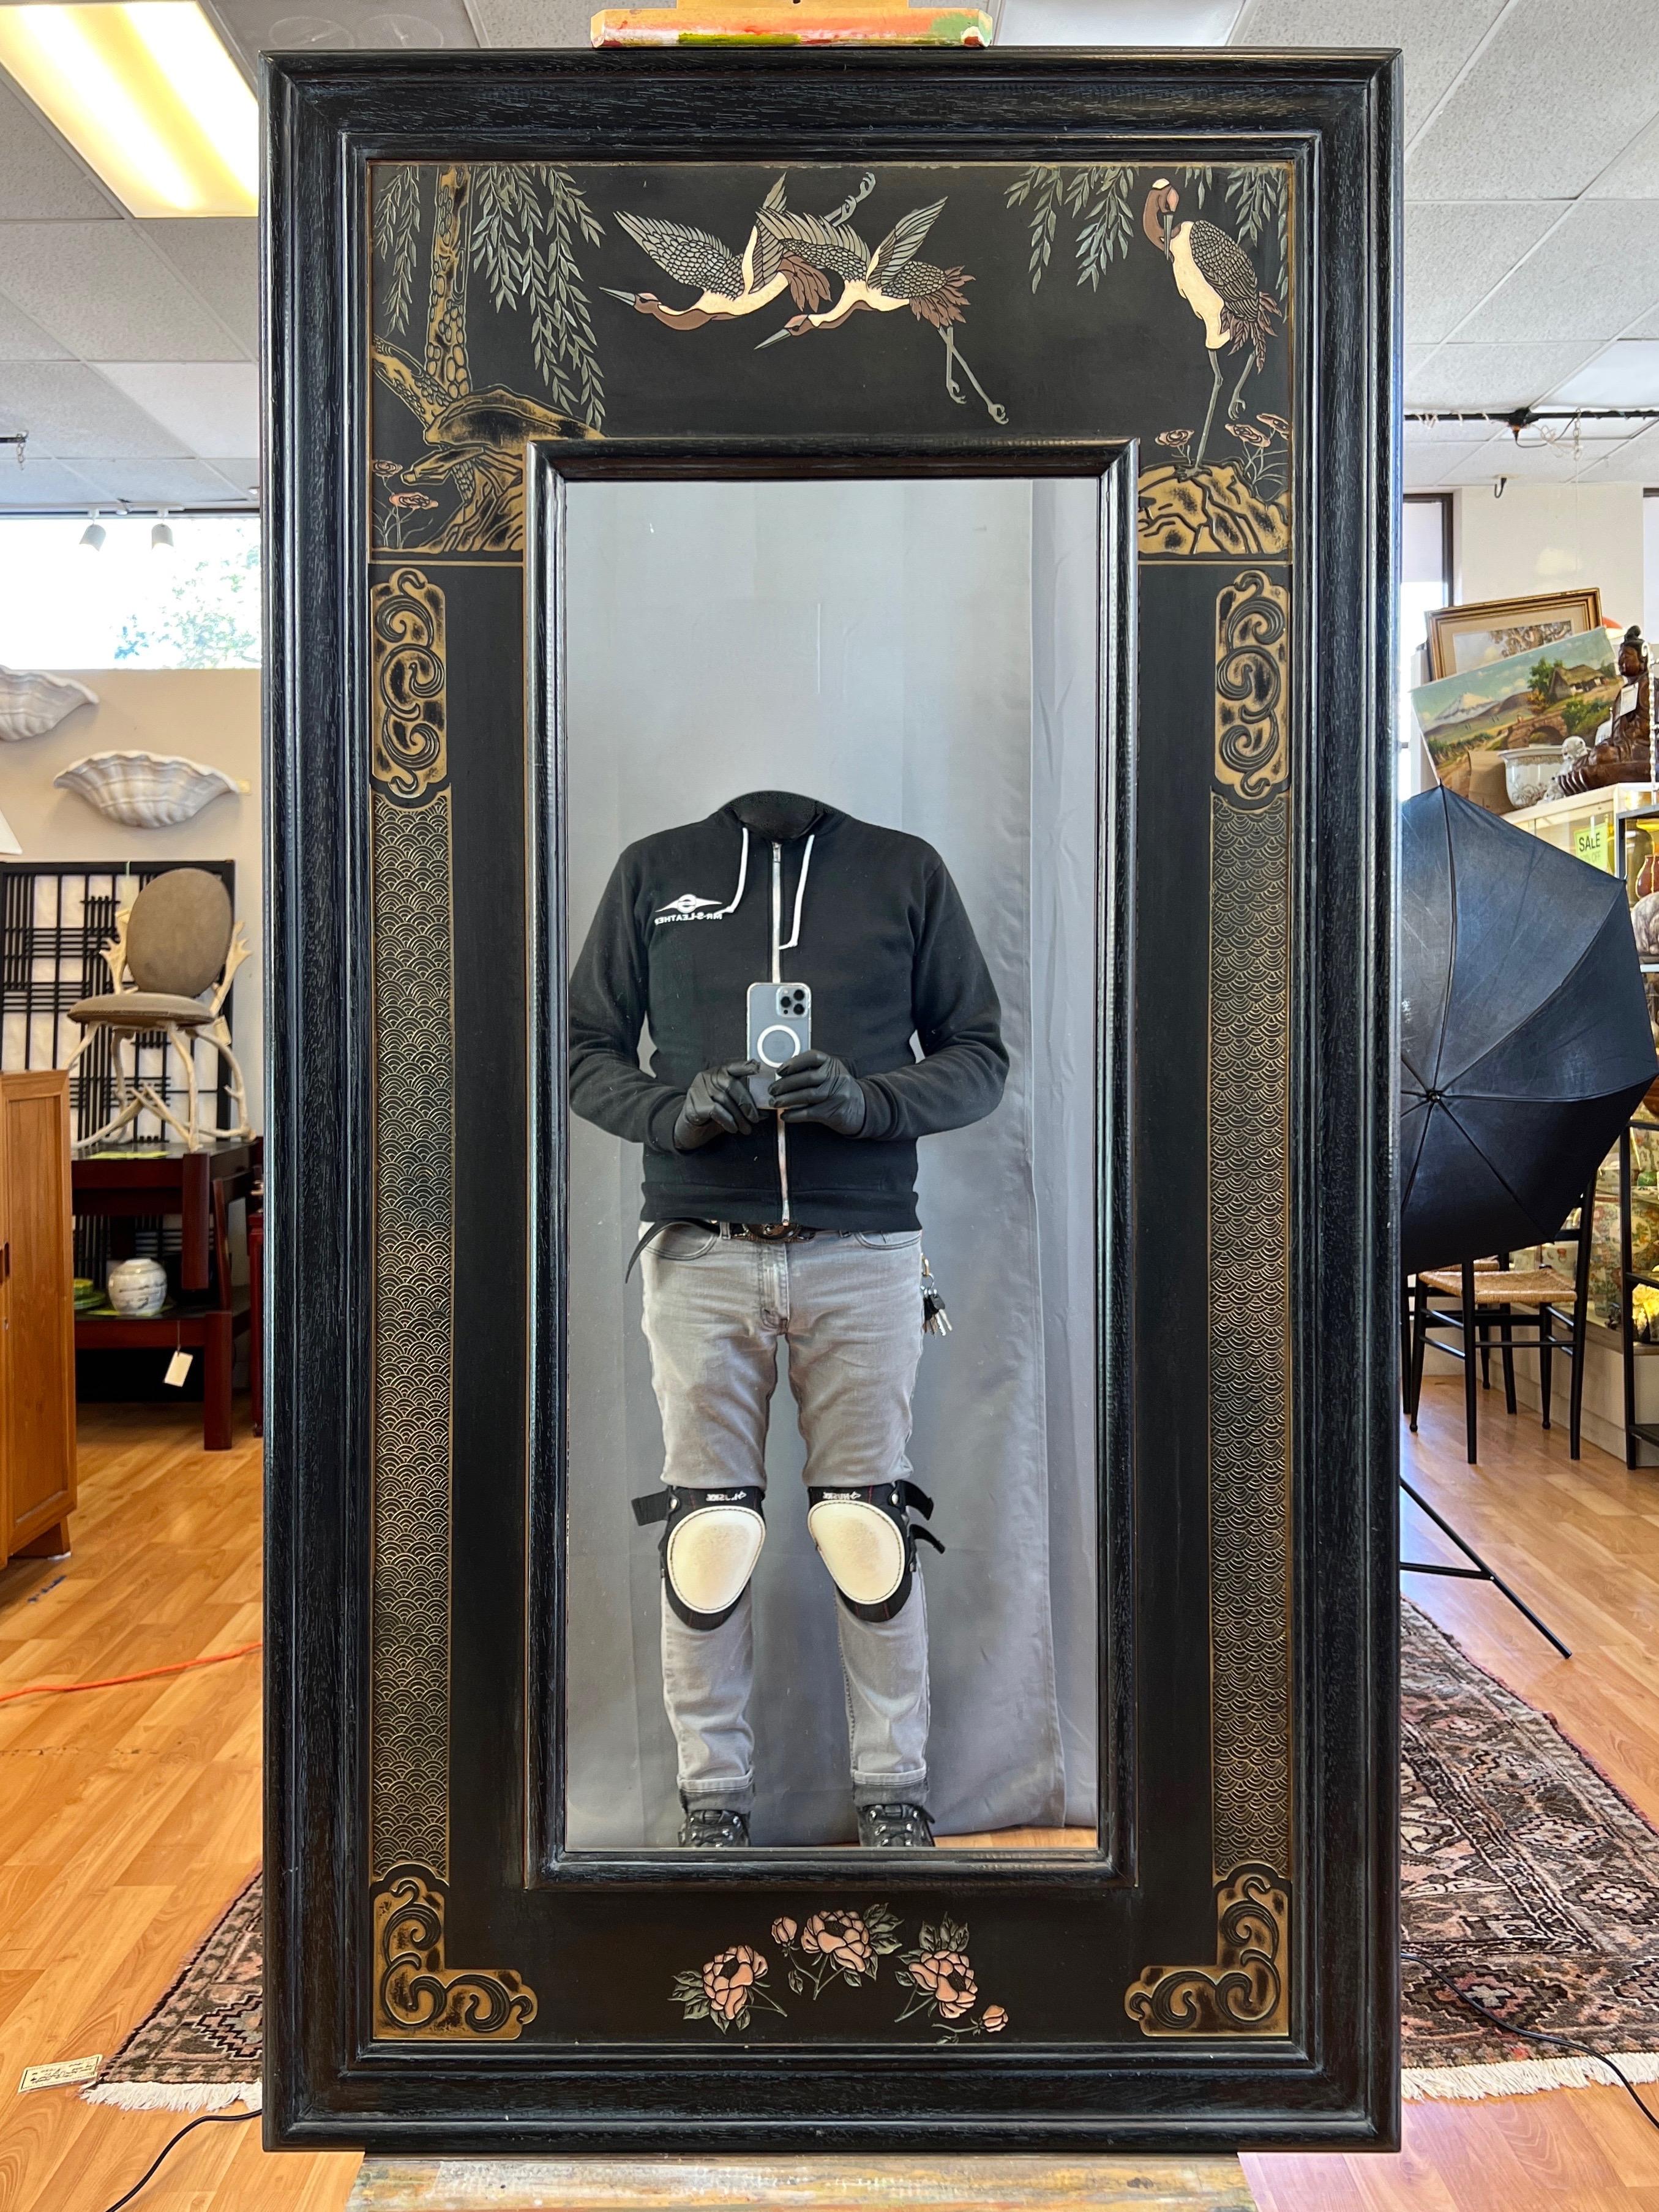 An exquisite late 1970s Asian black cerused wood wall mirror with relief carved Japanese crane and camellia flower motif.

Black lacquered cerused wood frame around a hand-carved and painted satin black panel relief featuring a variety of nearly